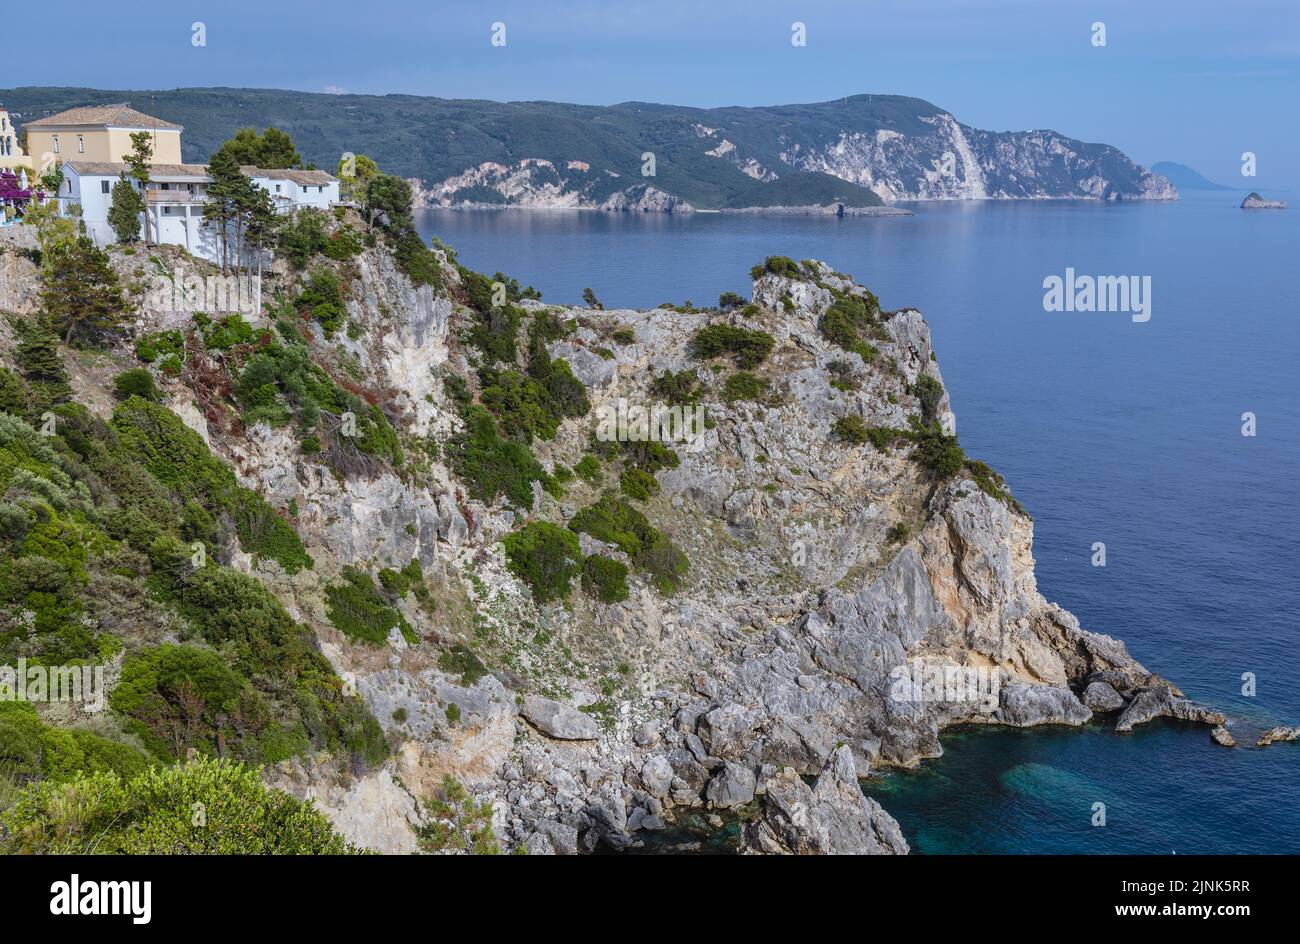 Aerial view from mountain in Palaiokastritsa famous resort town on Greek Island of Corfu, Monastery on the left side Stock Photo